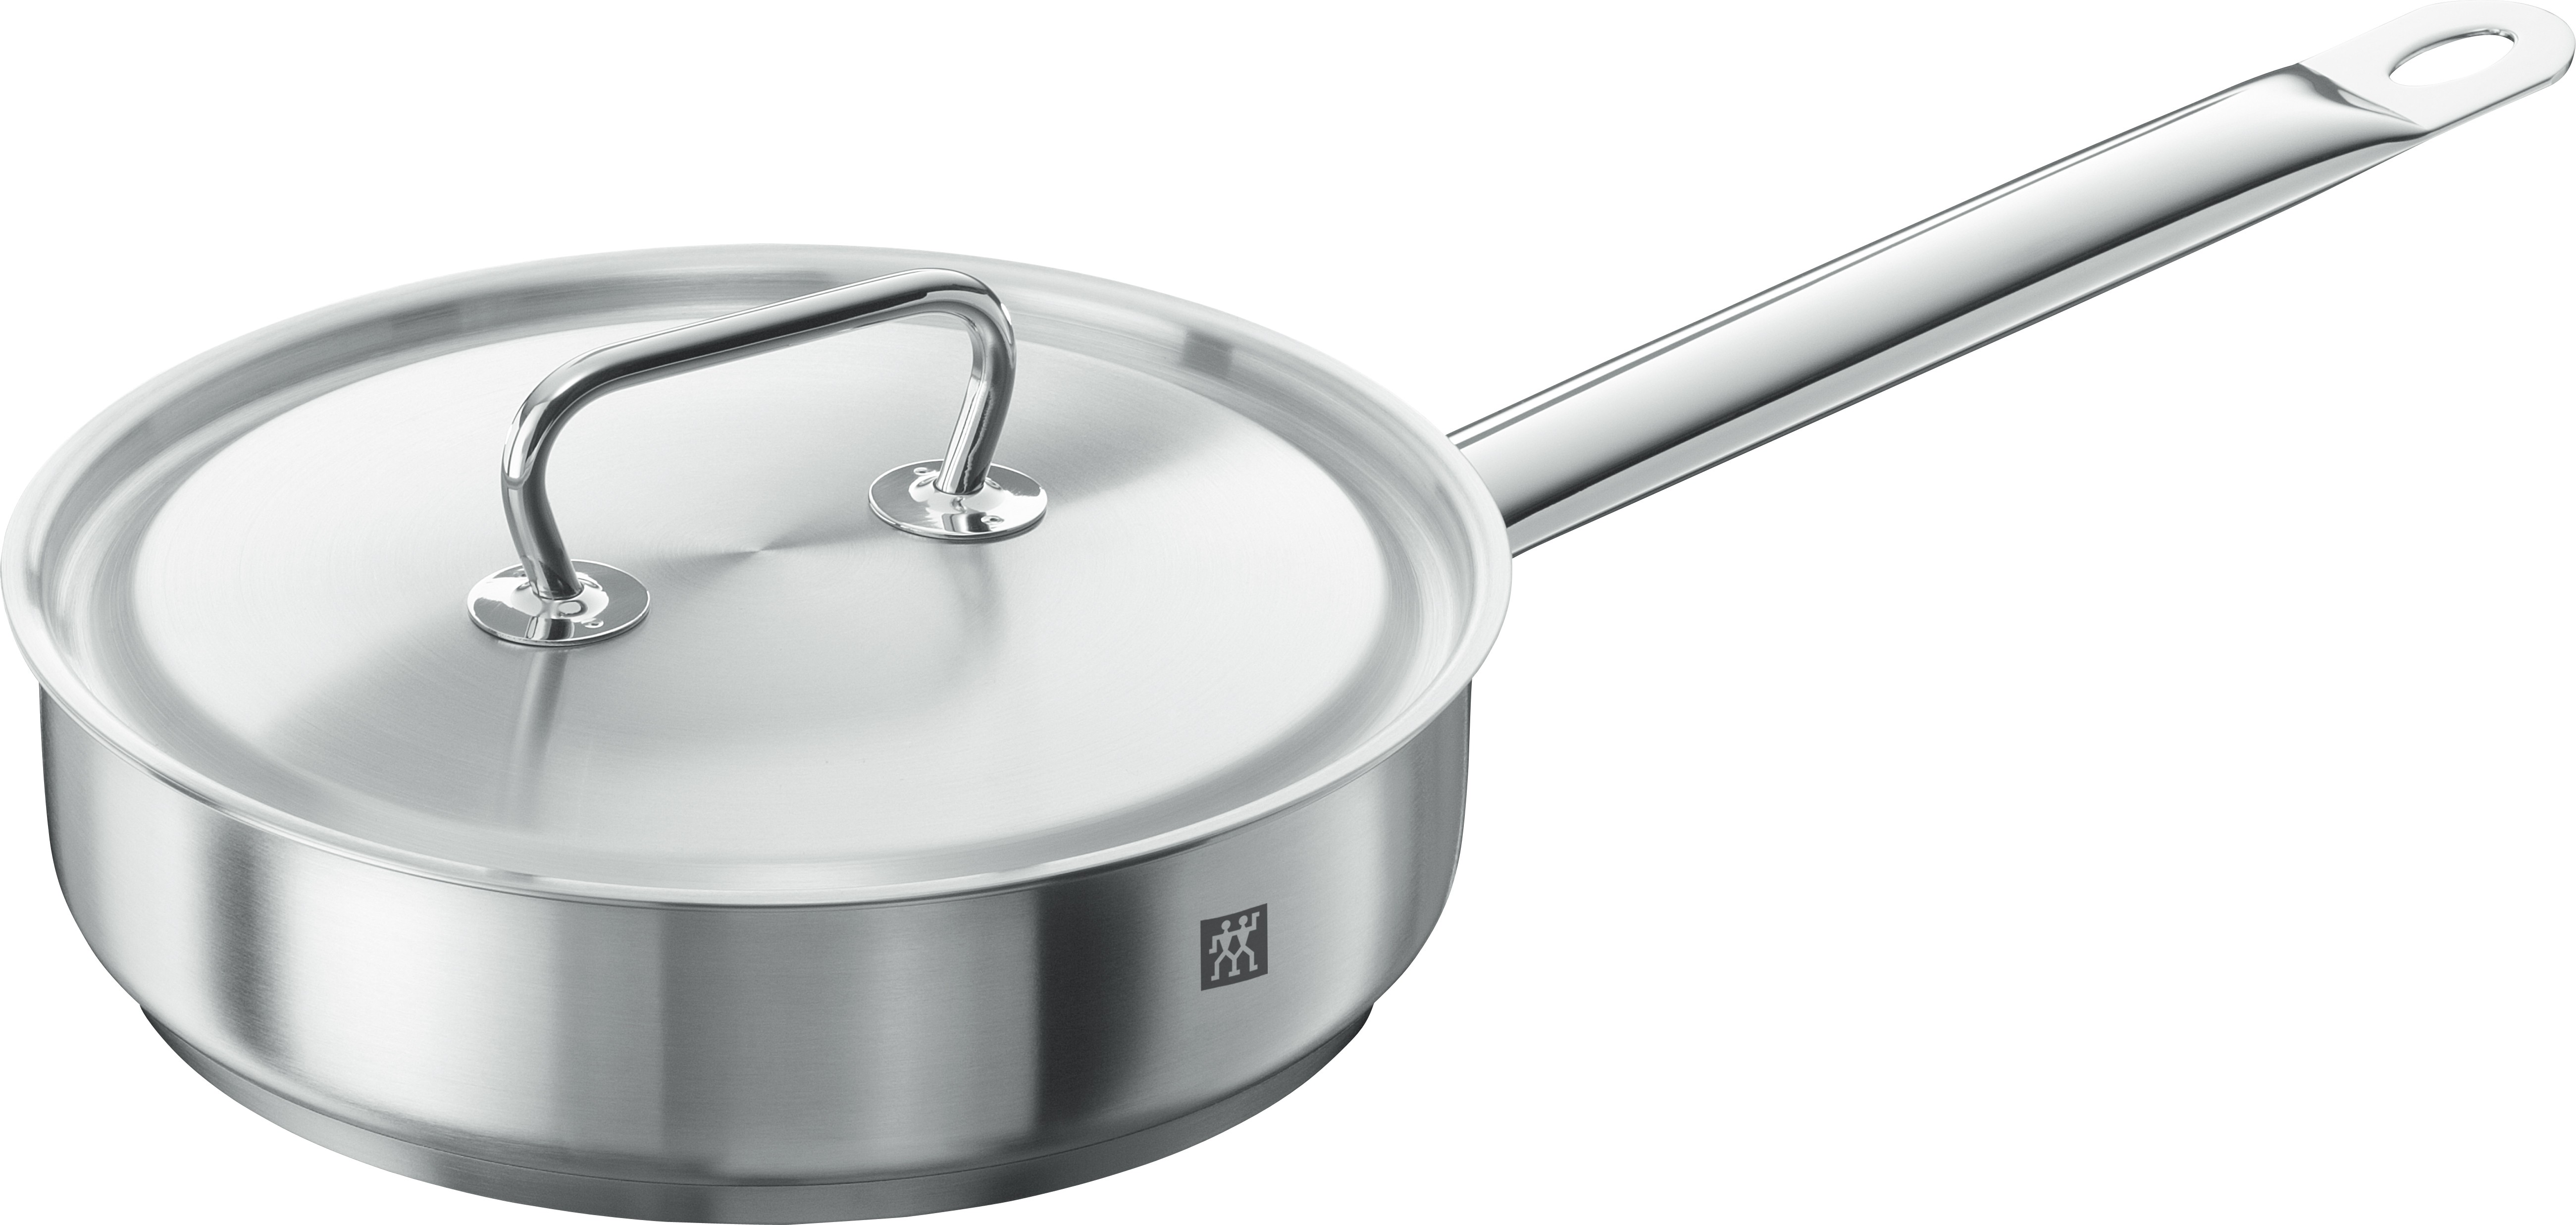 Zwilling Energy Cookware Review: The Ultimate Cooking Companion.